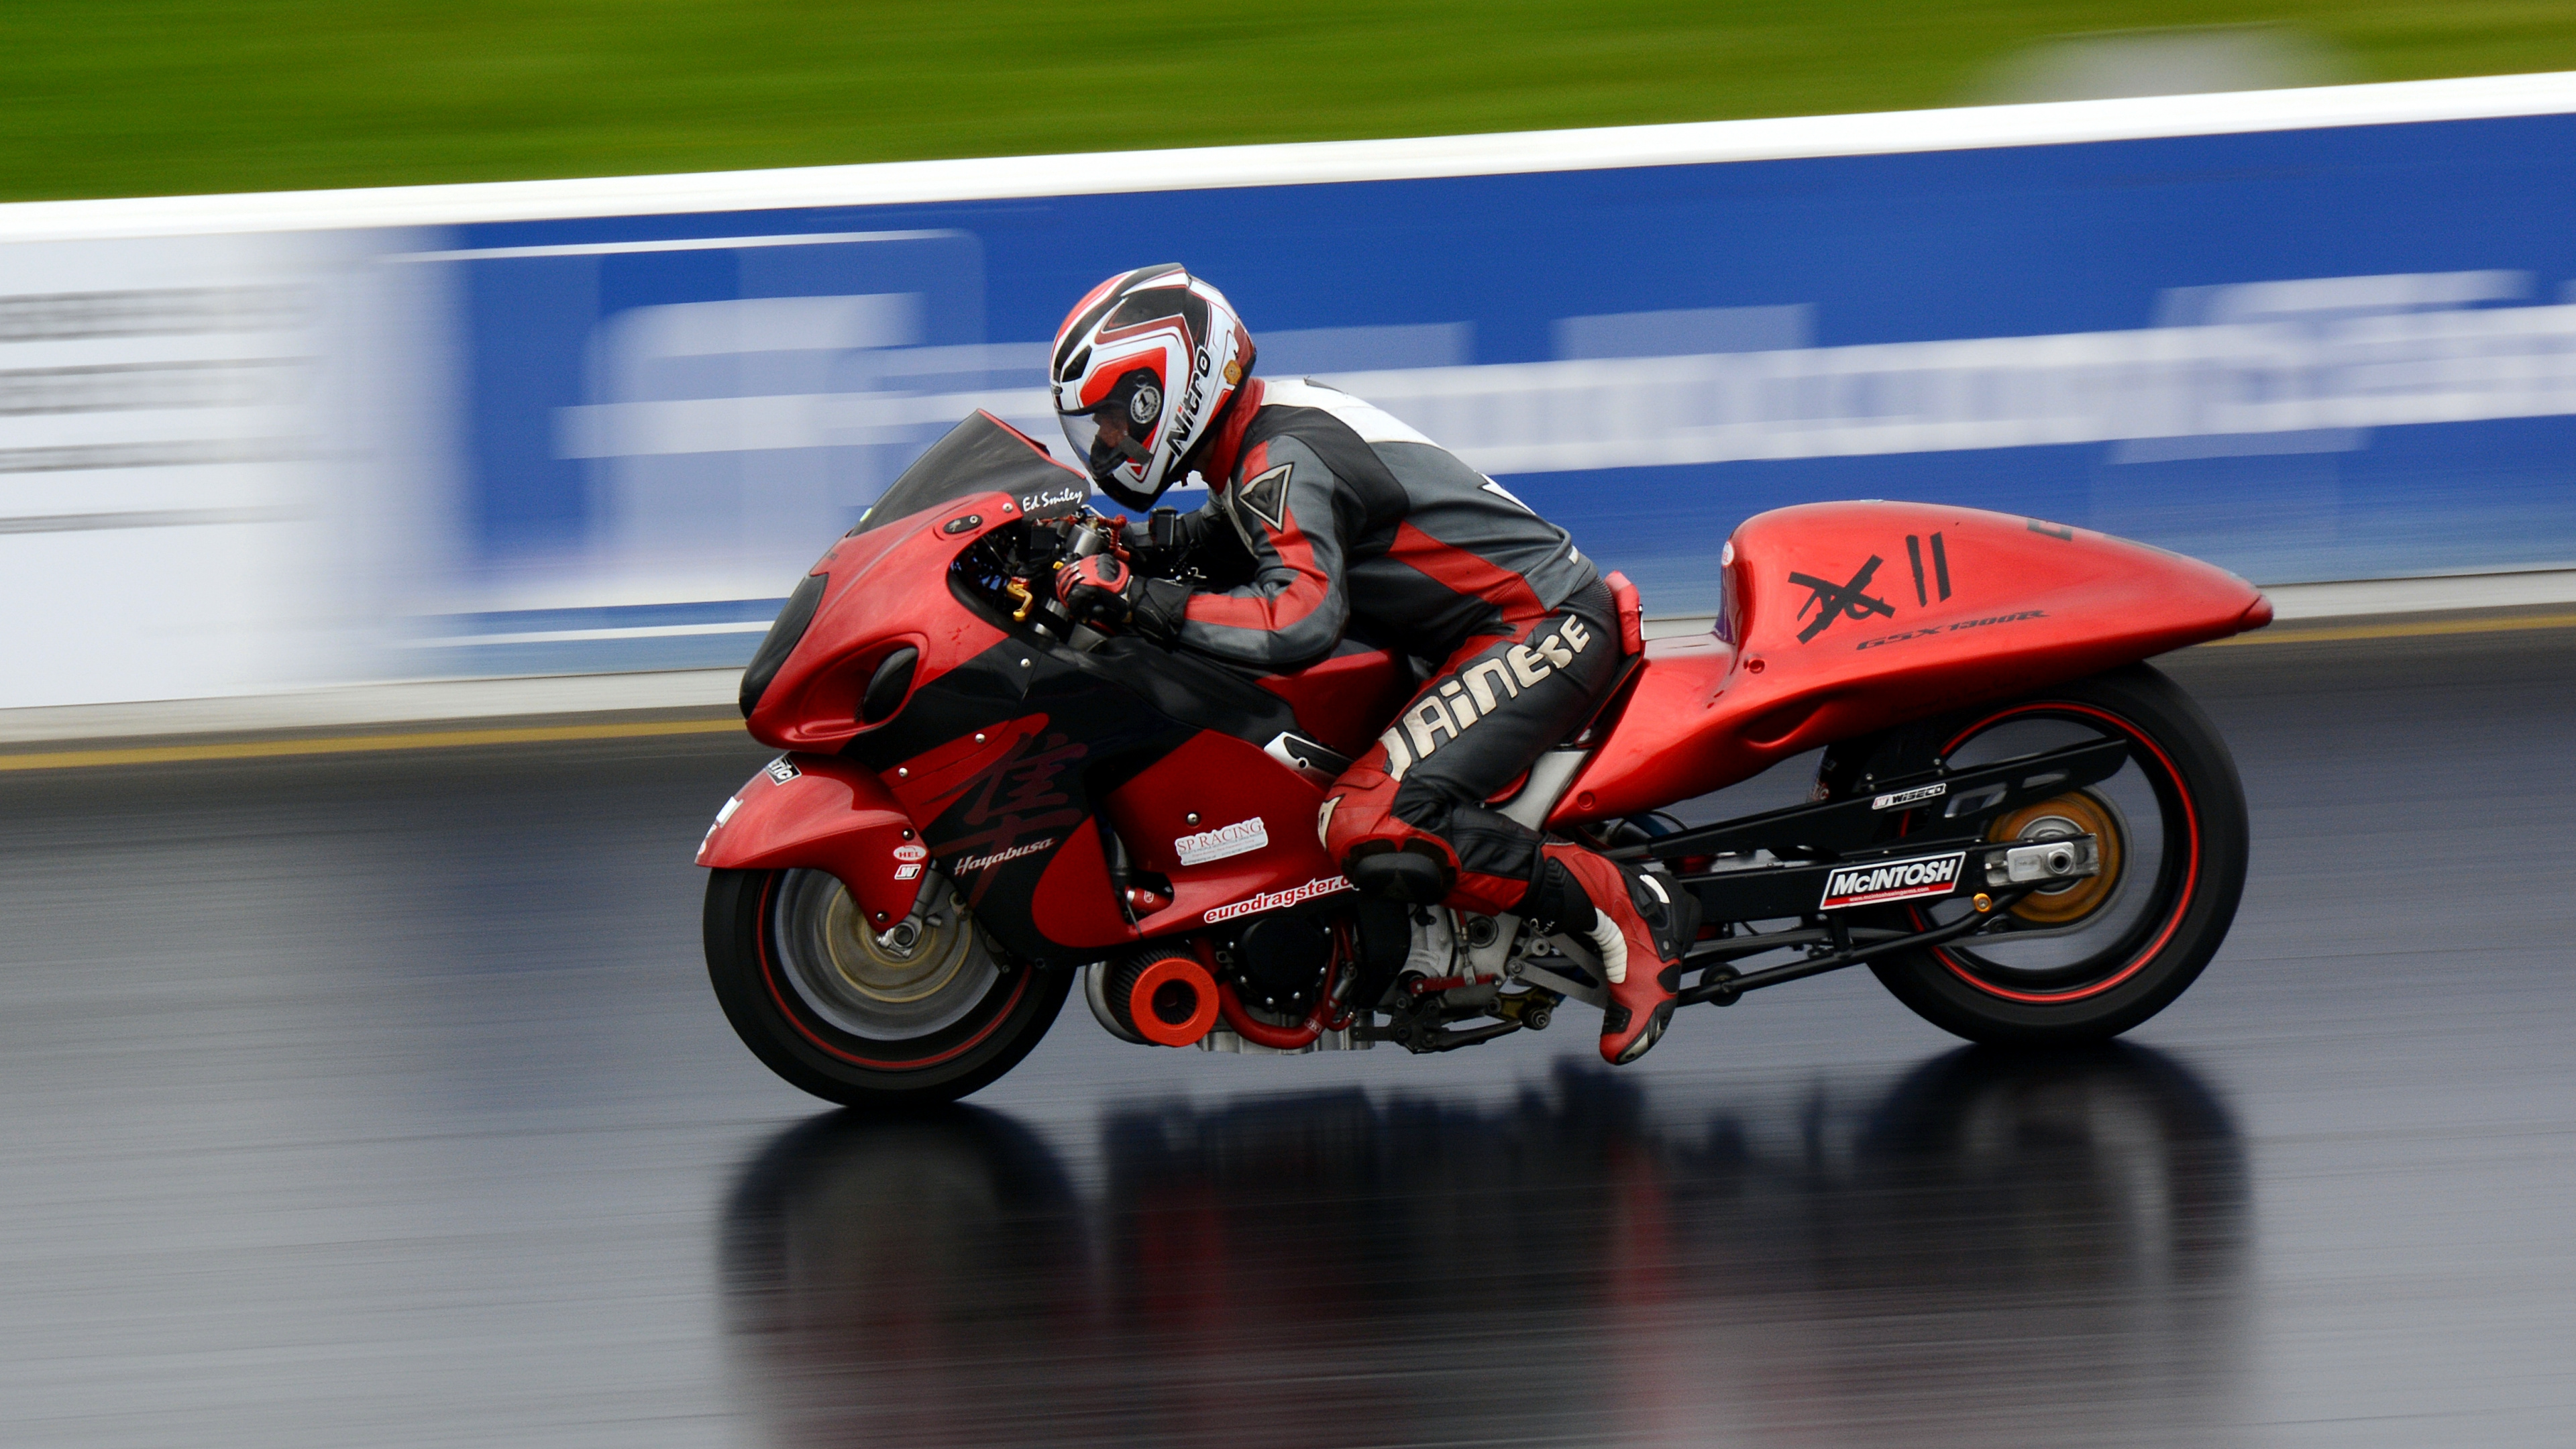 Man in Red and Black Motorcycle Helmet Riding Red Sports Bike. Wallpaper in 3840x2160 Resolution